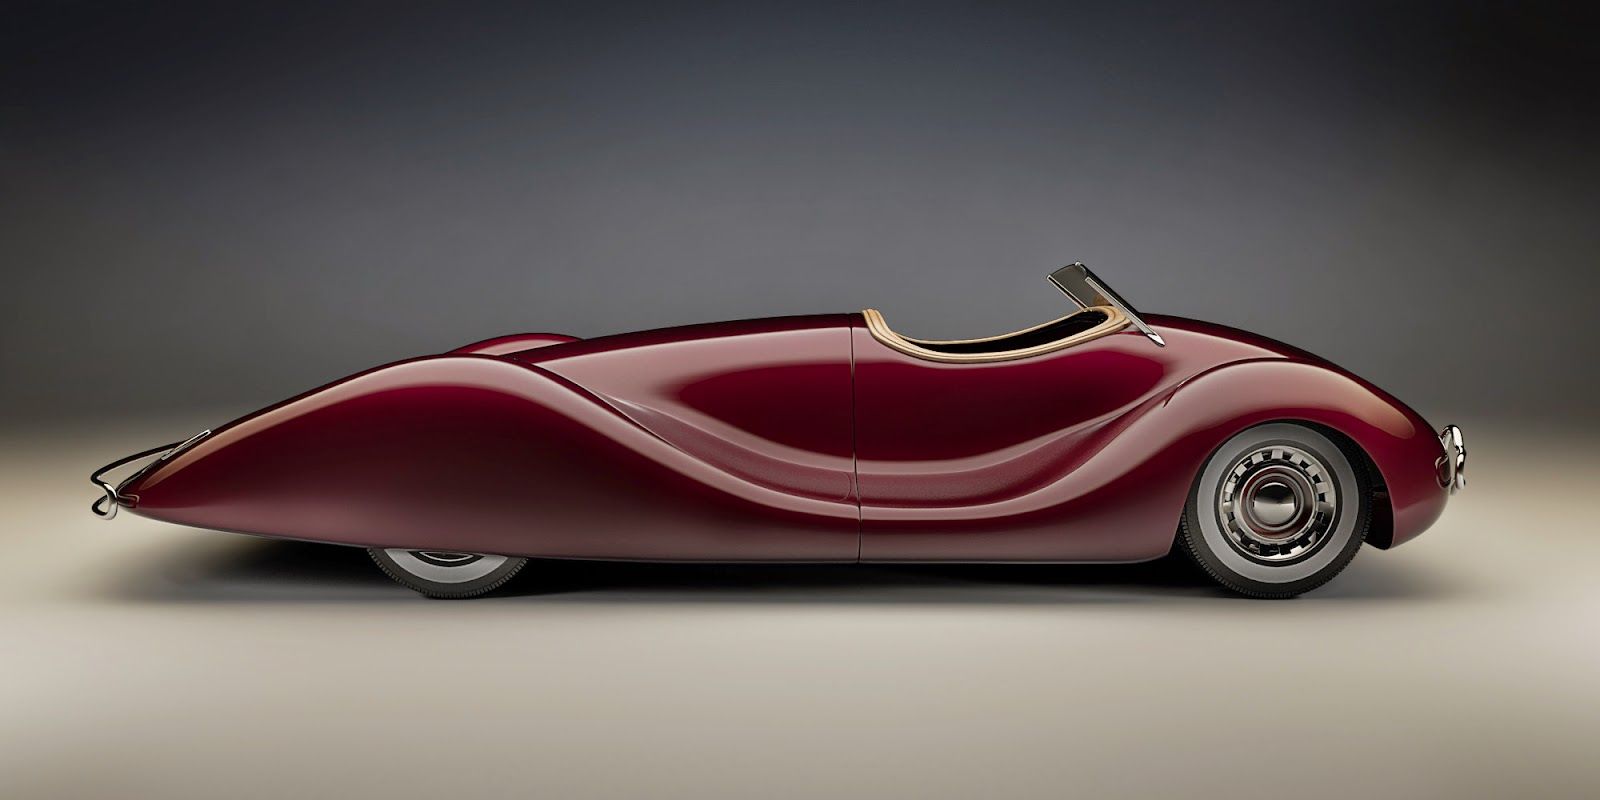 1948 Norman Timbs Special: See The America's Slickest Roadster